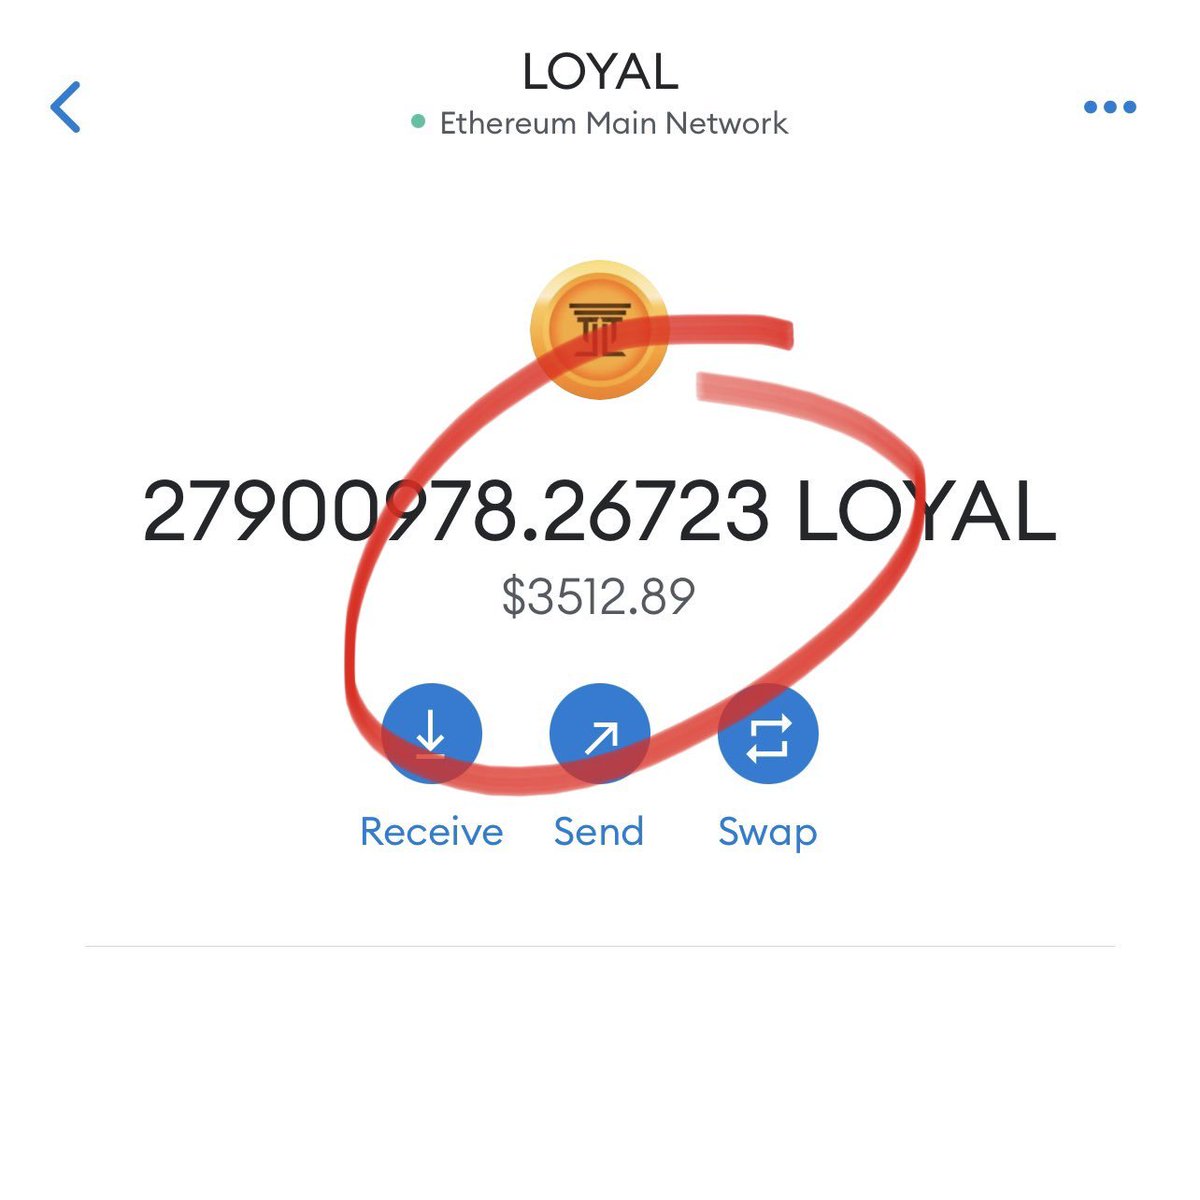 LISTEN UP WEB3. 👹

THE $LOYAL AIRDROP IS NOW LIVE, WAITING TO BE CLAIMED.

🔗 loyalty.holdings

#Oculus #REFUND $MONG $LINK #4TOKEN #binance #memecoin $LTC #LOYAL $PEPE $MATIC $PSYOP #MATIC $FINALE $BEN #BEN #HODL $FLOKI $SUI $HEX $CAPO $TSUKA #WWDC23 #Apple #Metaverse